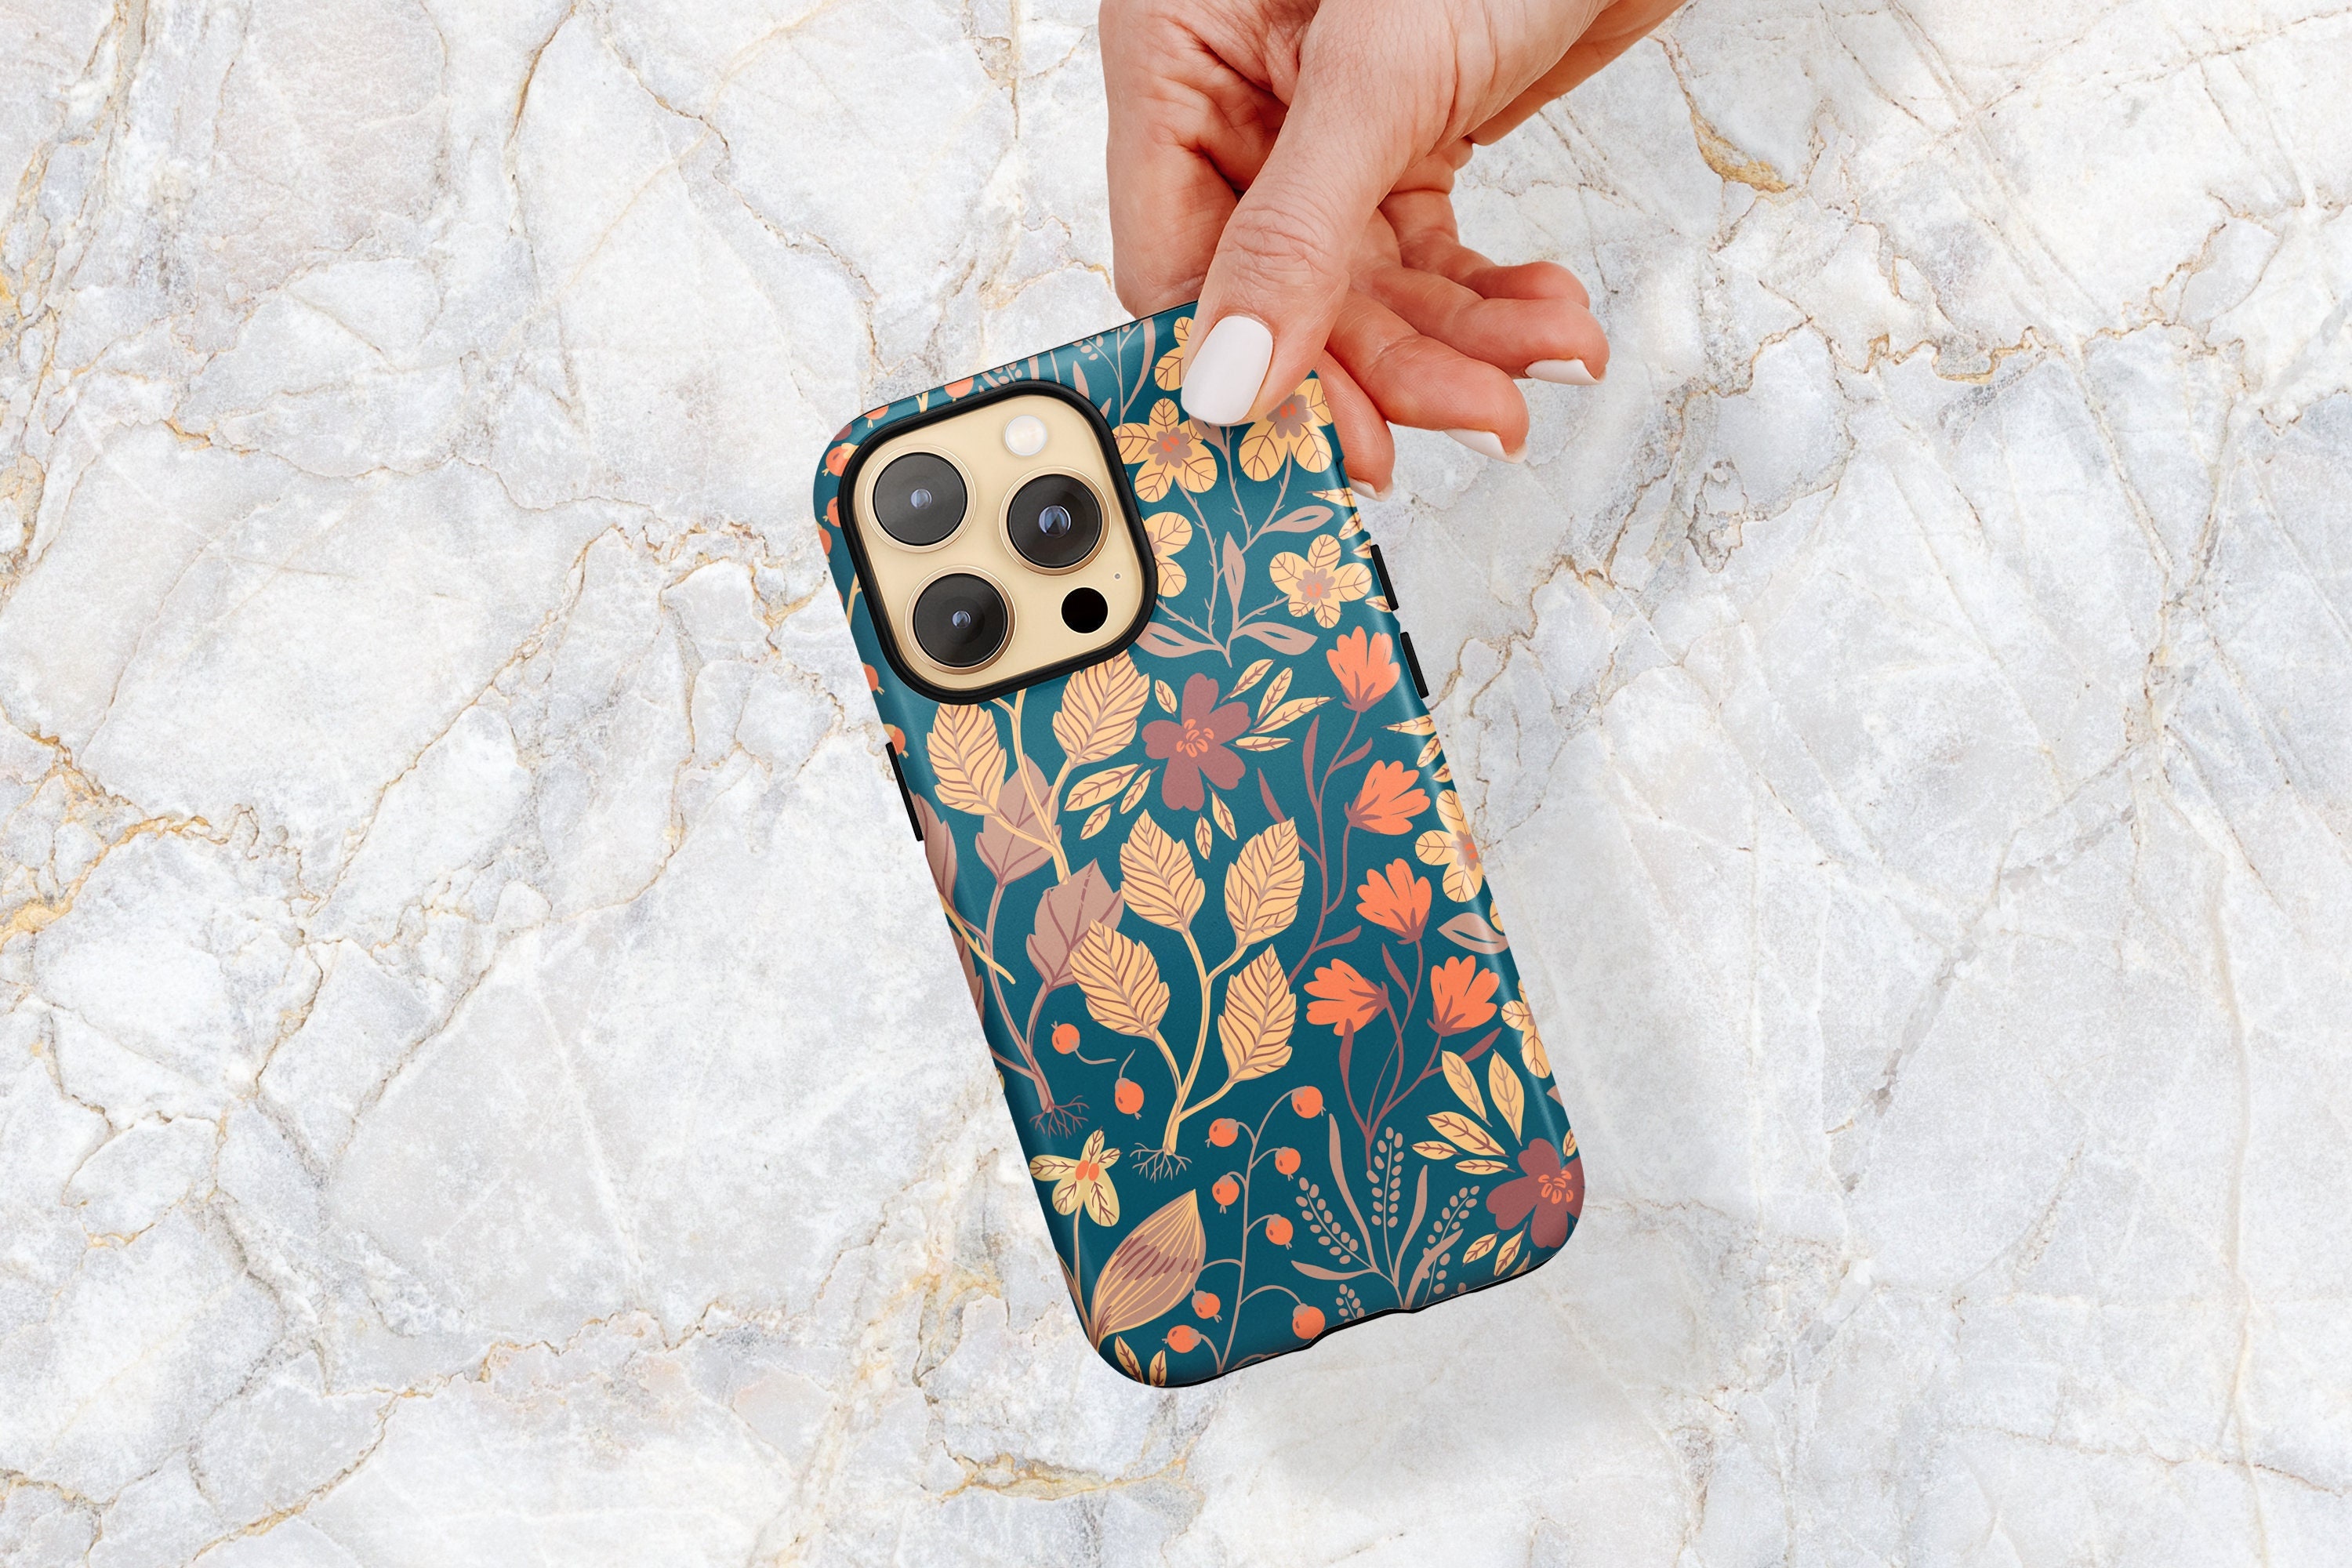  iPhone XS Max Joy in Artistic Creation: Art is the joy of  expressio Art Case : Cell Phones & Accessories